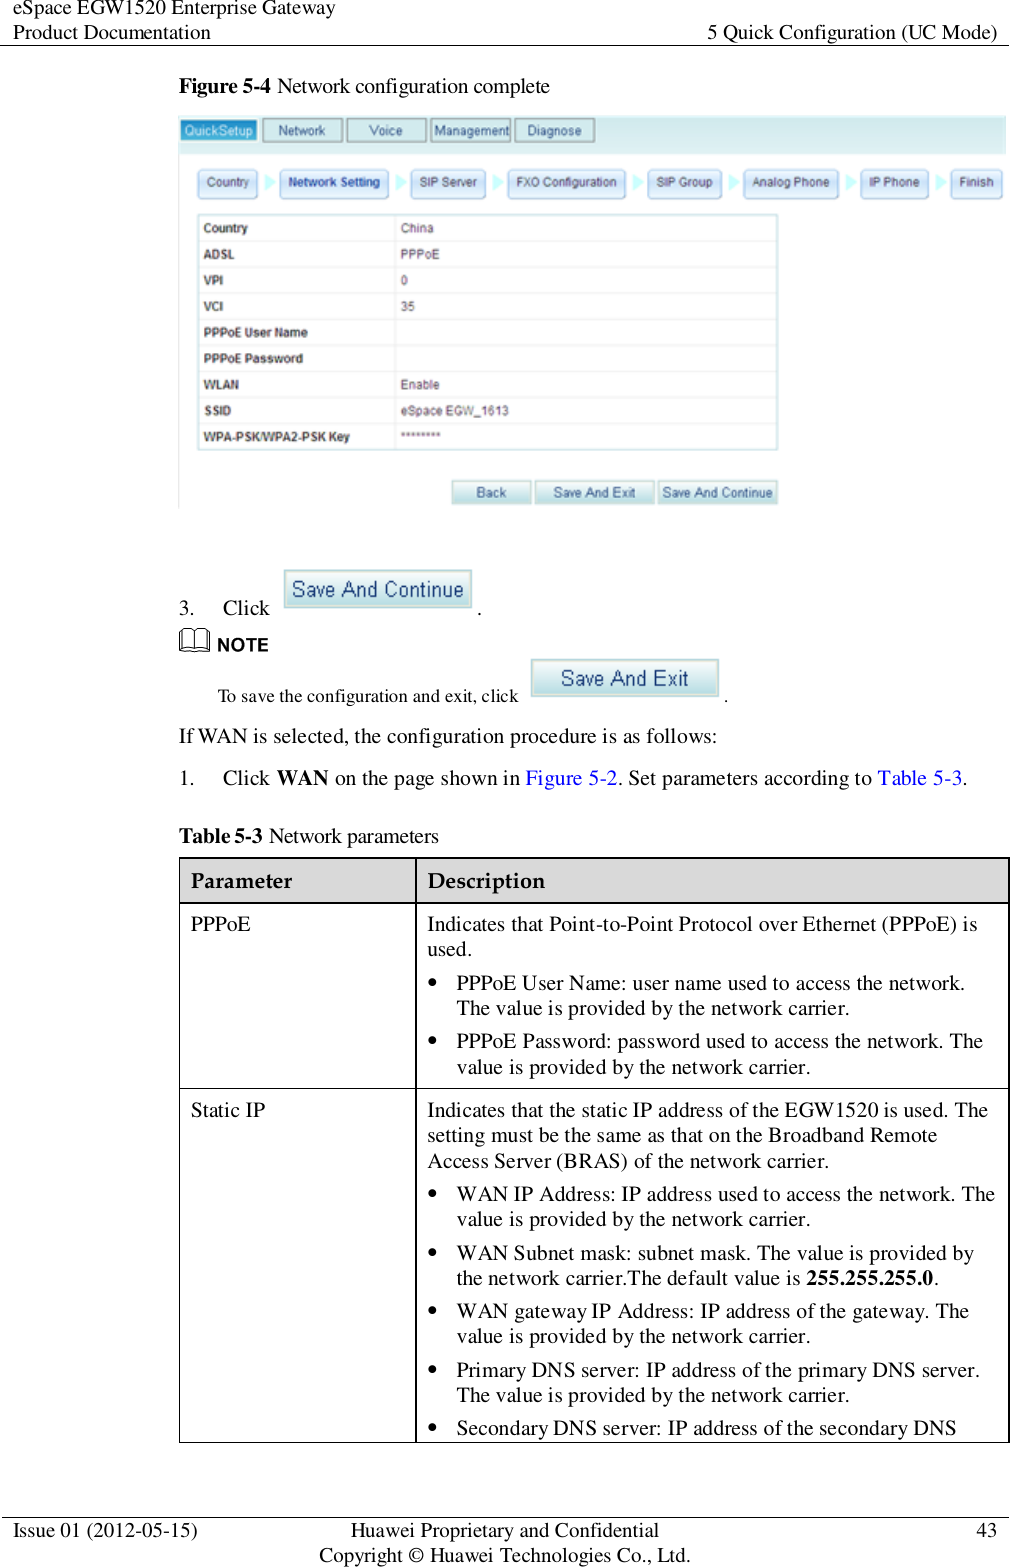 eSpace EGW1520 Enterprise Gateway Product Documentation 5 Quick Configuration (UC Mode)  Issue 01 (2012-05-15) Huawei Proprietary and Confidential                                     Copyright © Huawei Technologies Co., Ltd. 43  Figure 5-4 Network configuration complete   3. Click  .  To save the configuration and exit, click  . If WAN is selected, the configuration procedure is as follows: 1. Click WAN on the page shown in Figure 5-2. Set parameters according to Table 5-3. Table 5-3 Network parameters Parameter Description PPPoE Indicates that Point-to-Point Protocol over Ethernet (PPPoE) is used.  PPPoE User Name: user name used to access the network. The value is provided by the network carrier.  PPPoE Password: password used to access the network. The value is provided by the network carrier. Static IP Indicates that the static IP address of the EGW1520 is used. The setting must be the same as that on the Broadband Remote Access Server (BRAS) of the network carrier.  WAN IP Address: IP address used to access the network. The value is provided by the network carrier.  WAN Subnet mask: subnet mask. The value is provided by the network carrier.The default value is 255.255.255.0.  WAN gateway IP Address: IP address of the gateway. The value is provided by the network carrier.  Primary DNS server: IP address of the primary DNS server. The value is provided by the network carrier.  Secondary DNS server: IP address of the secondary DNS 